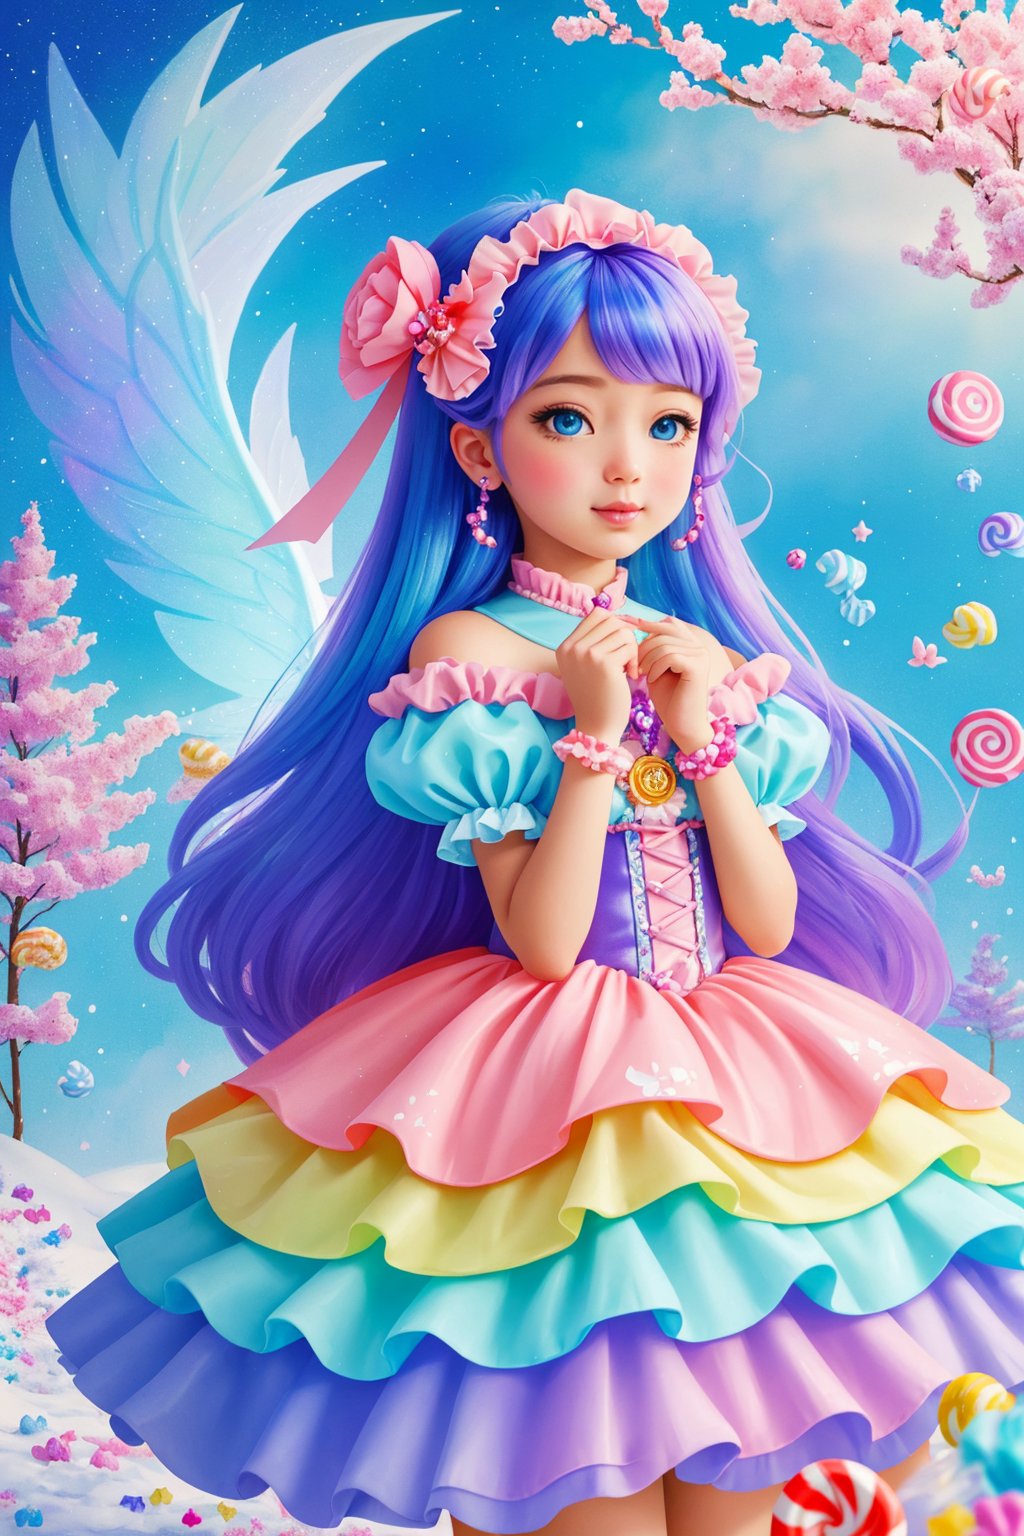 Digital Illustration, Artistic style, Wide-angle view with vibrant candy colors and dreamy motifs, DeviantArt and Fantasy Art inspirations, (candy-themed art:1.2), (artistic interpretation:1.15), (candy dreams:1.18), (wide-angle view:1.12), (artistic composition:1.16), (vibrant candy colors:1.2), (dreamy motifs:1.18), (girl's whimsy:1.15), (whimsical view:1.12), (colorful vision:1.16), (fantasy aesthetics:1.2), (captivating artistry:1.18), (candy fantasy:1.15), (whimsical world:1.14), (sugar-coated wonderland:1.12), (mythical details:1.16)
